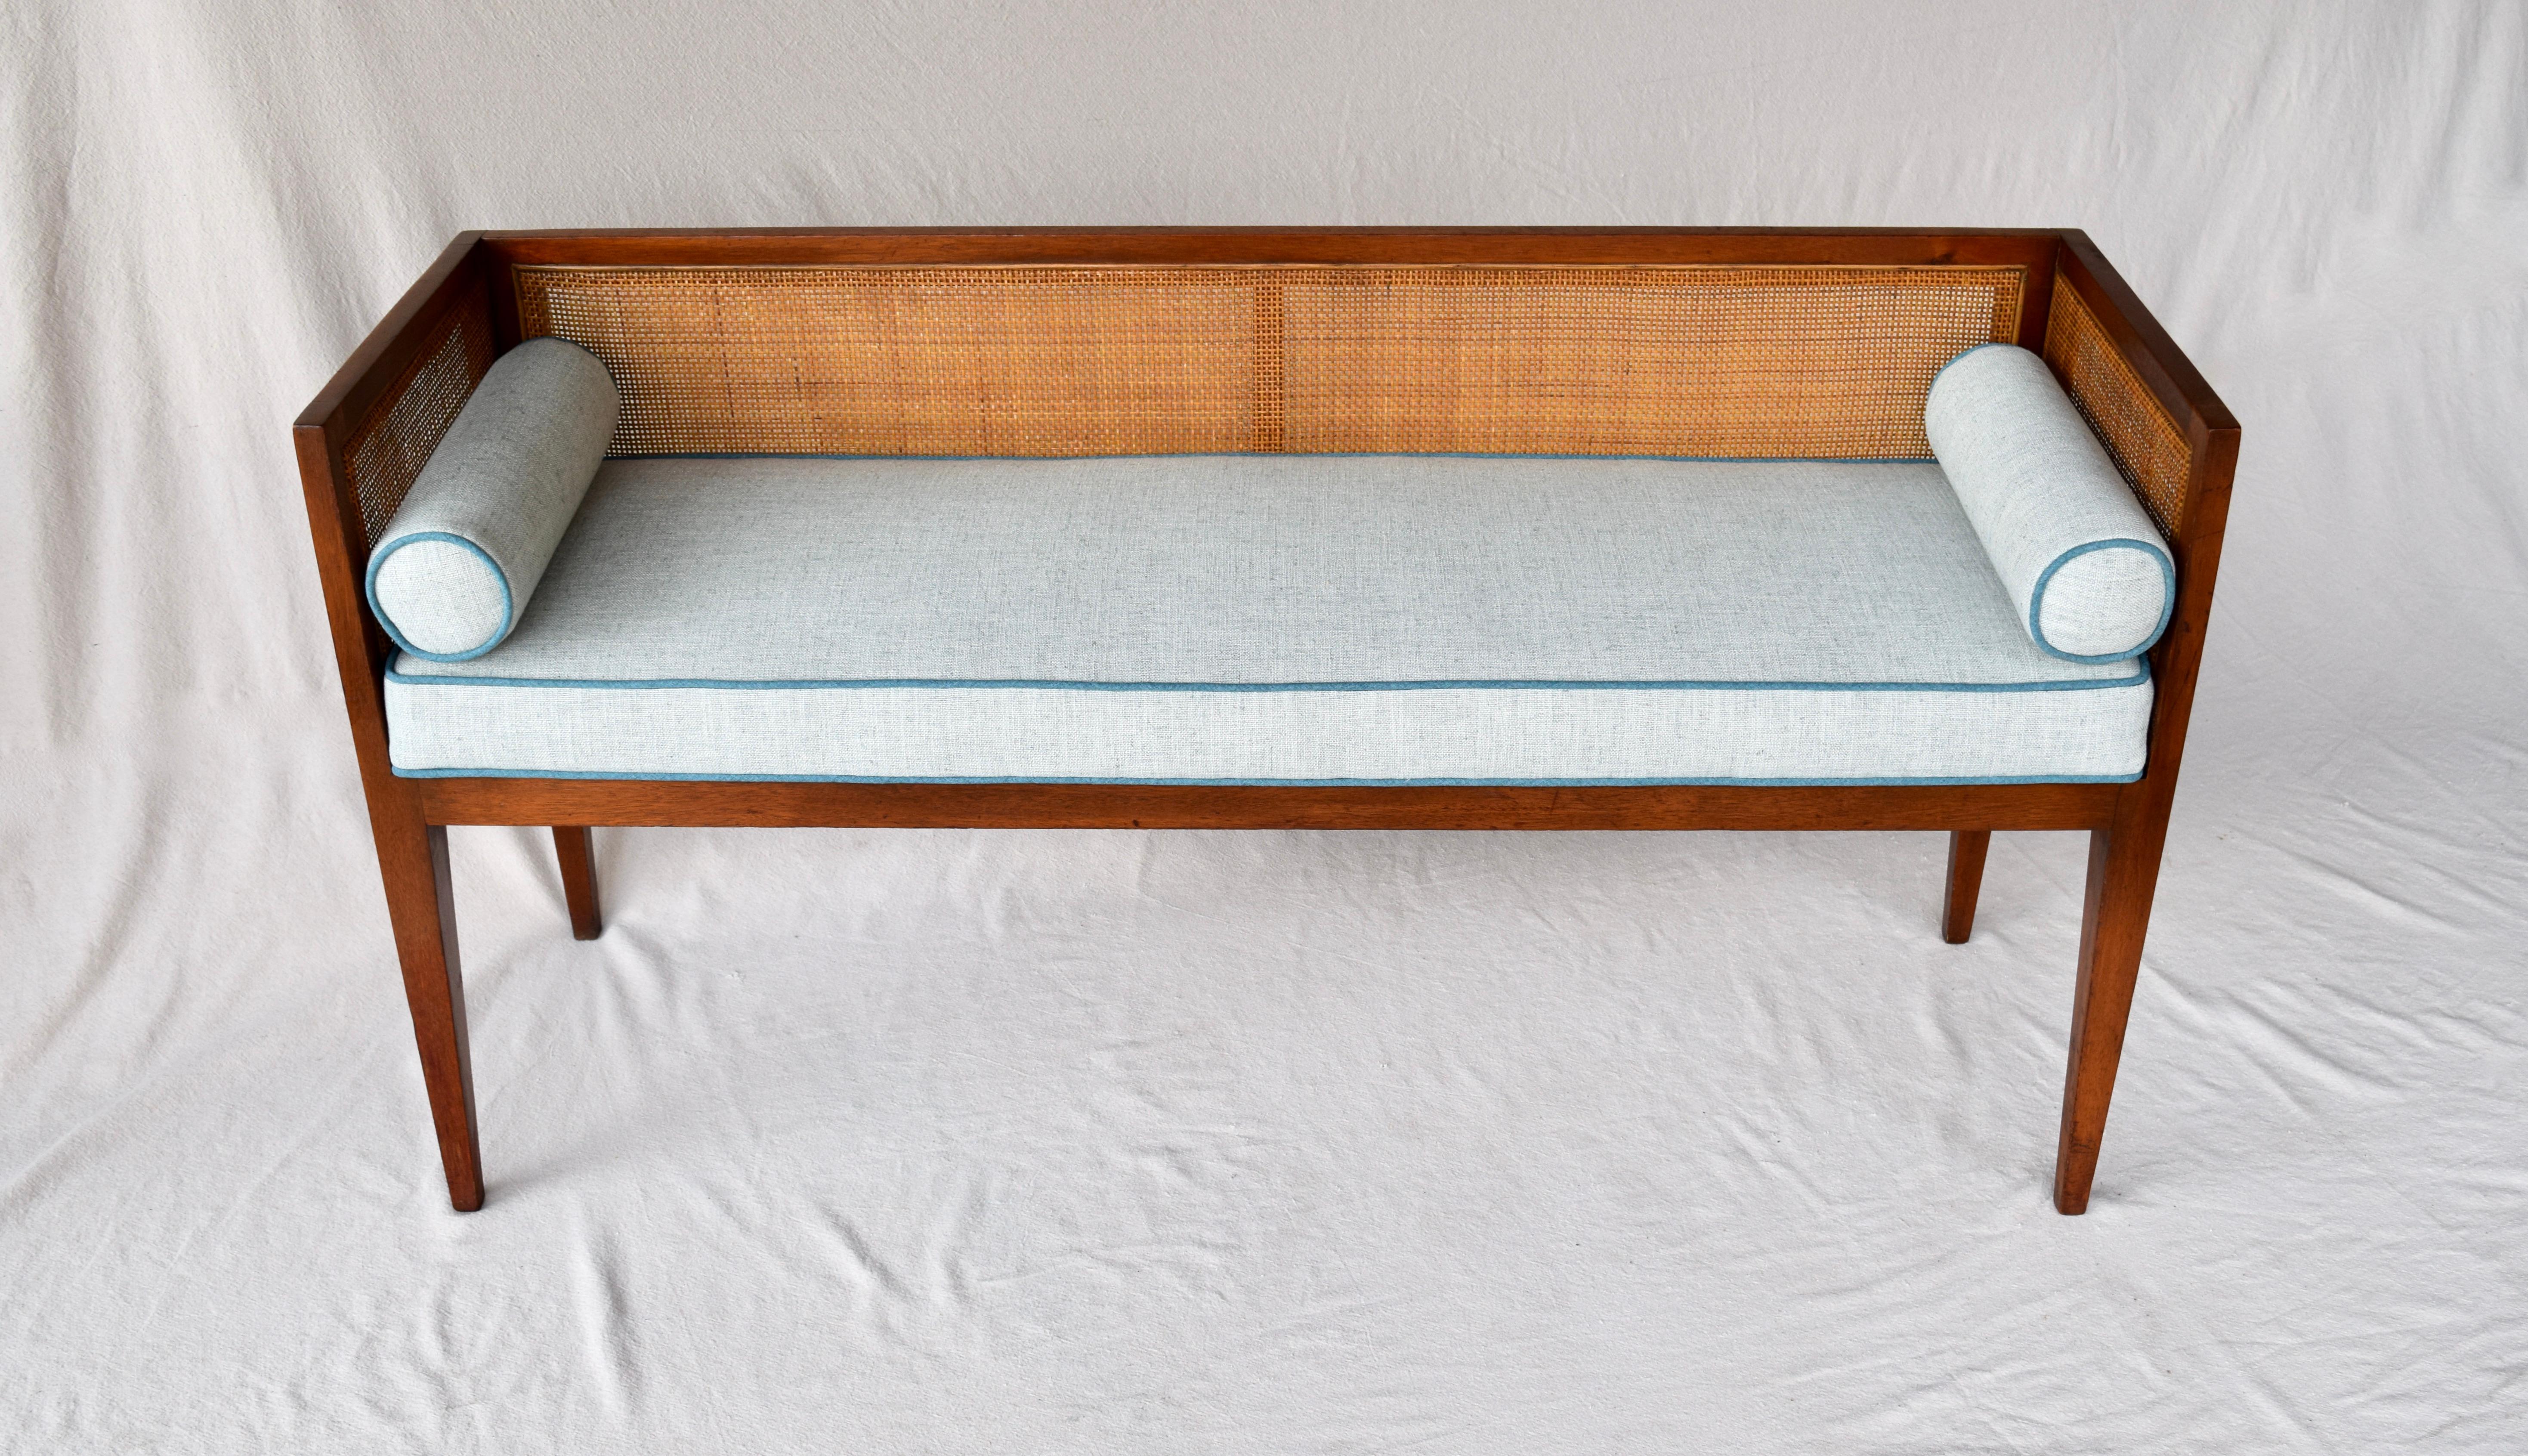 Solid walnut Mid-Century Modern window bench or settee attributed to Edward Wormley for Dunbar. Lithe line design constructed of walnut frame with original fine scale caning. Restored seat and bolster cushions are upholstered is soft blue linen